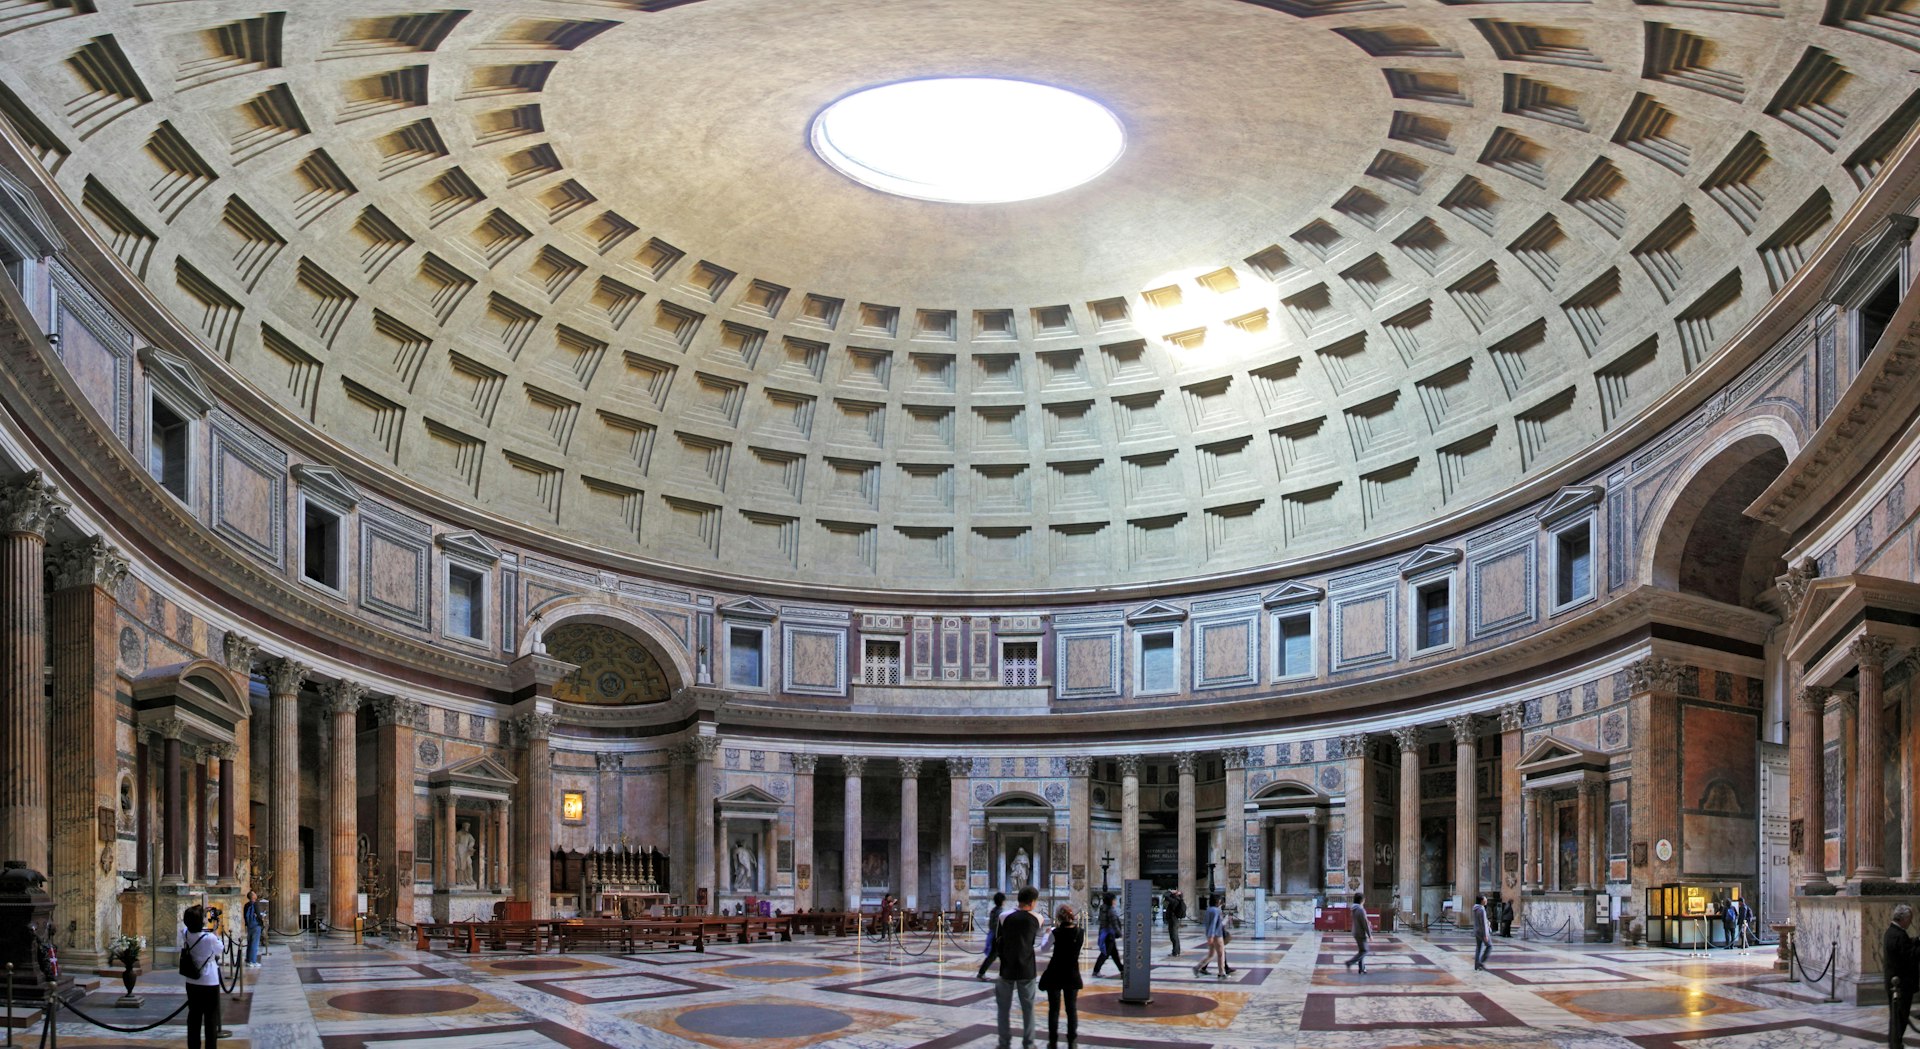 The interior of the Pantheon with light flooding through the opening in the roof of its vast dome